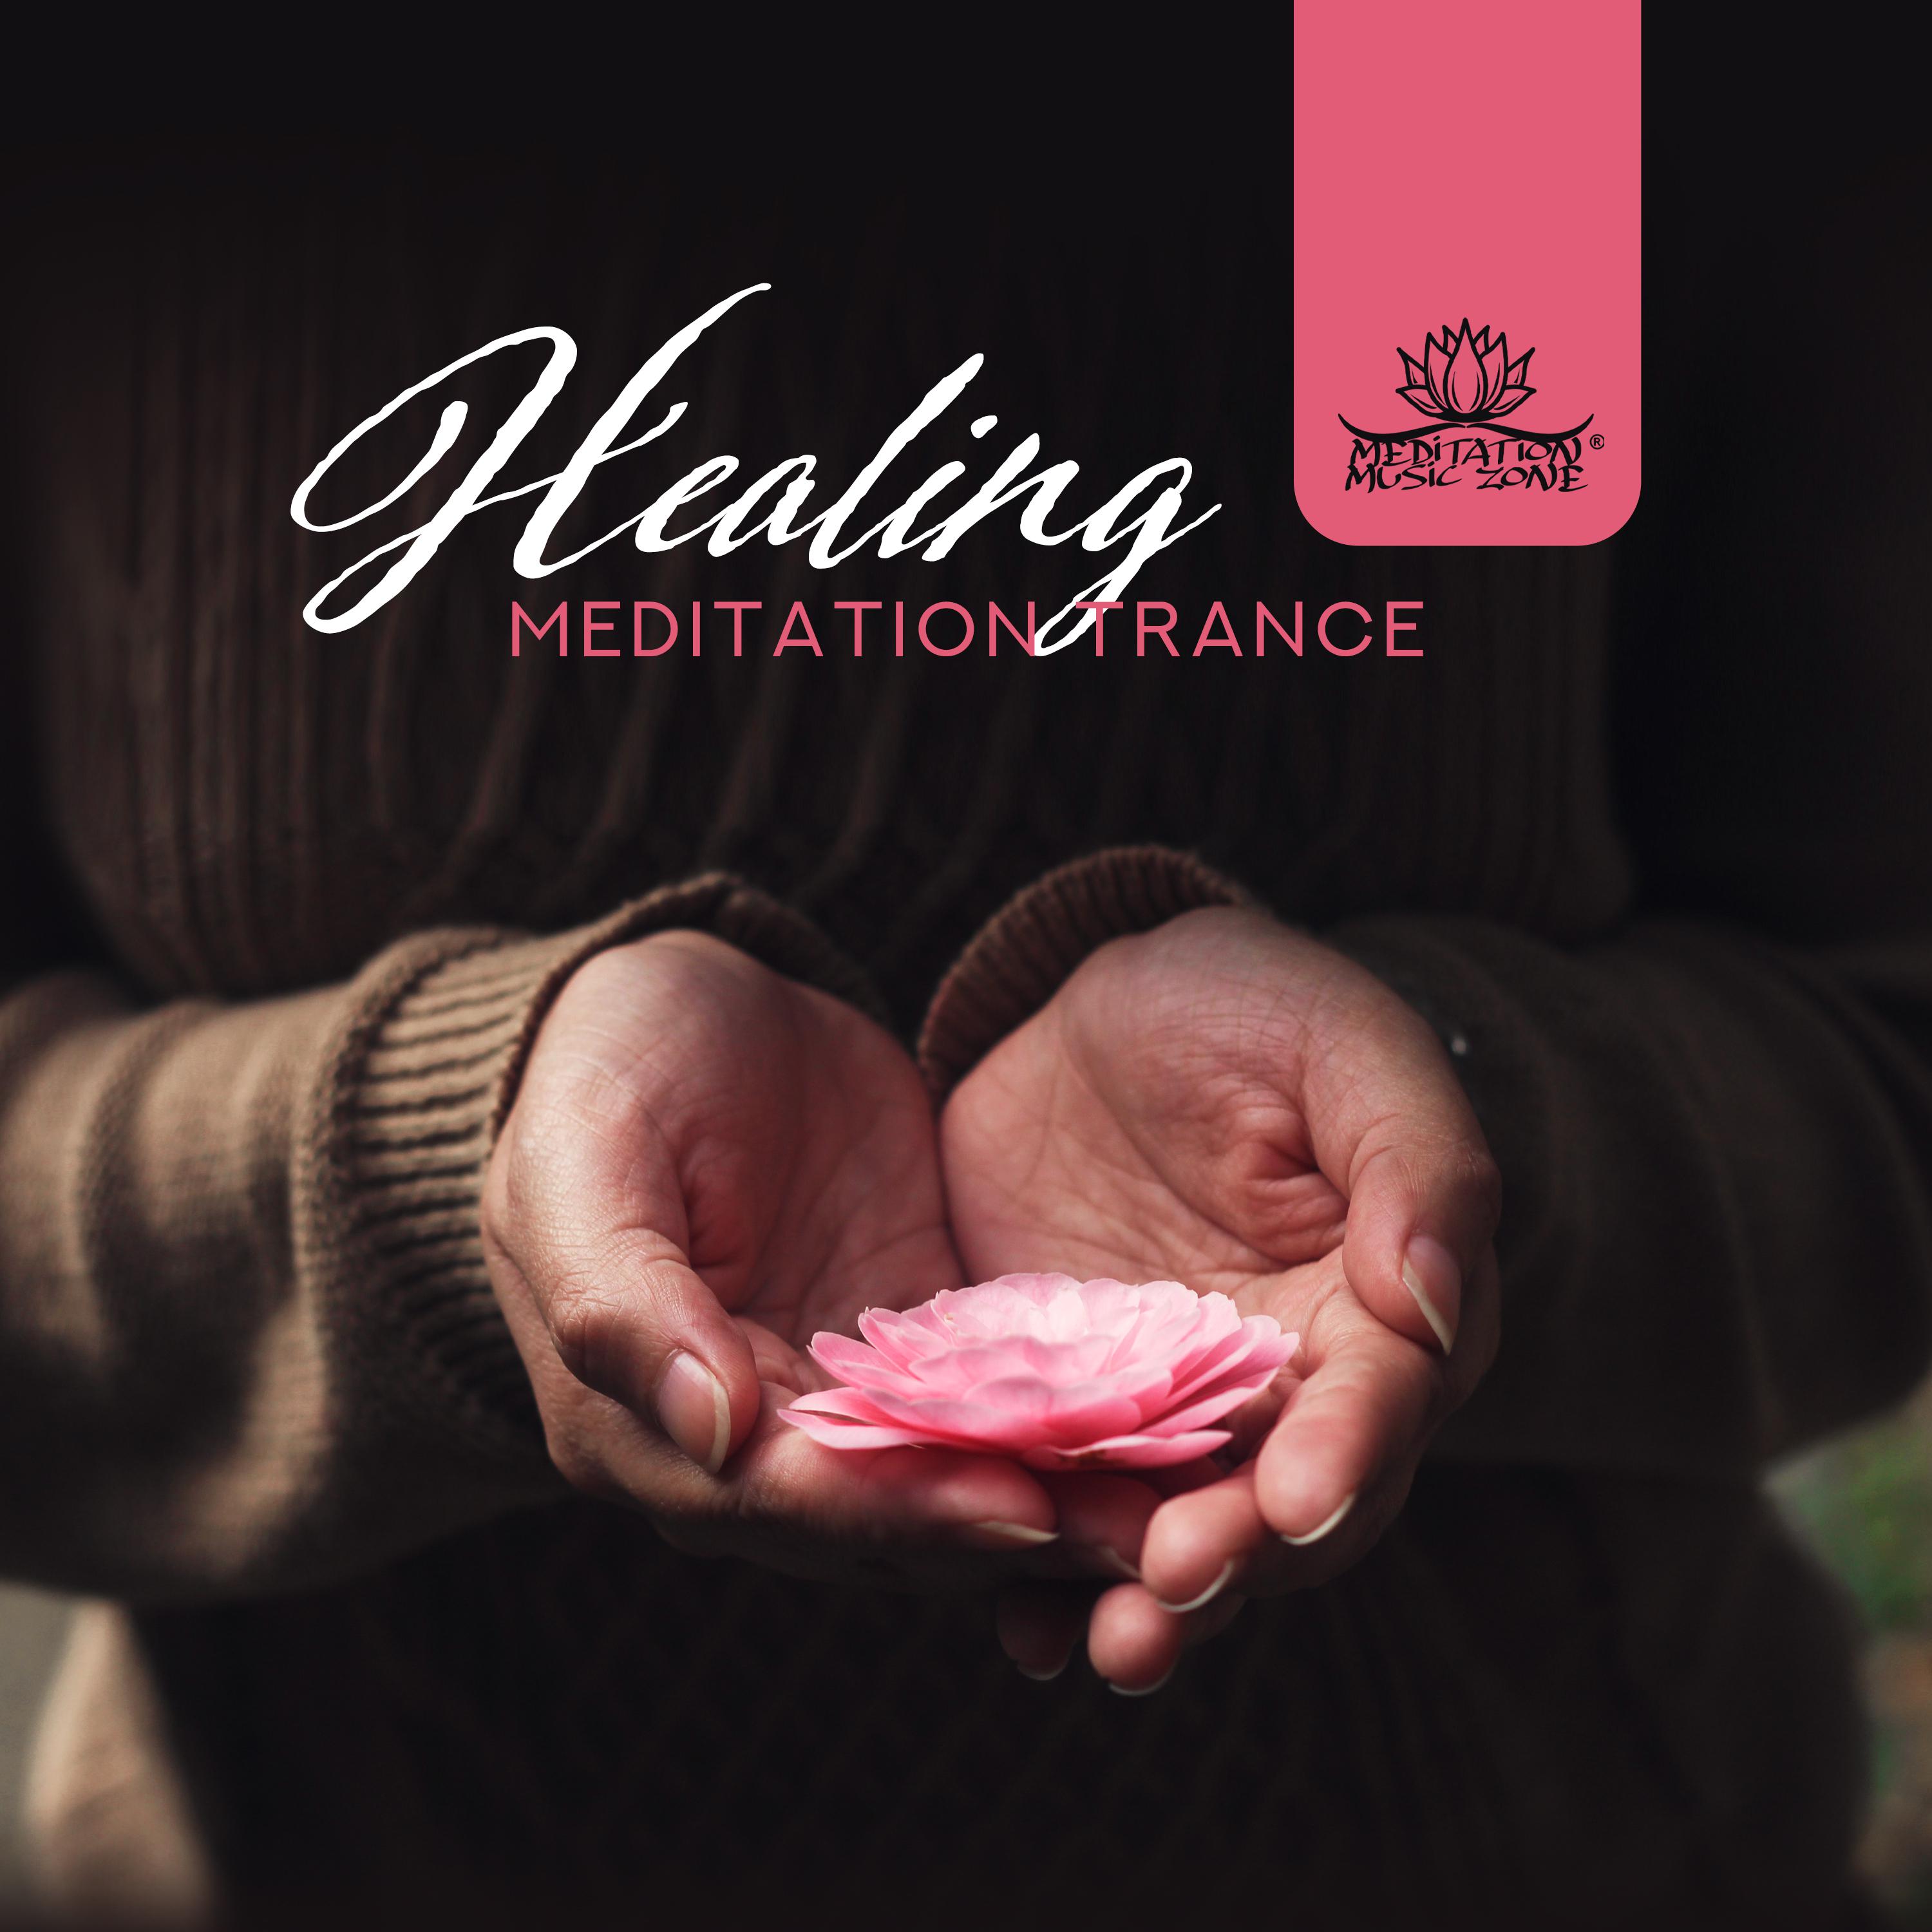 Healing Meditation Trance (Therapy for Mind, Body & Soul)